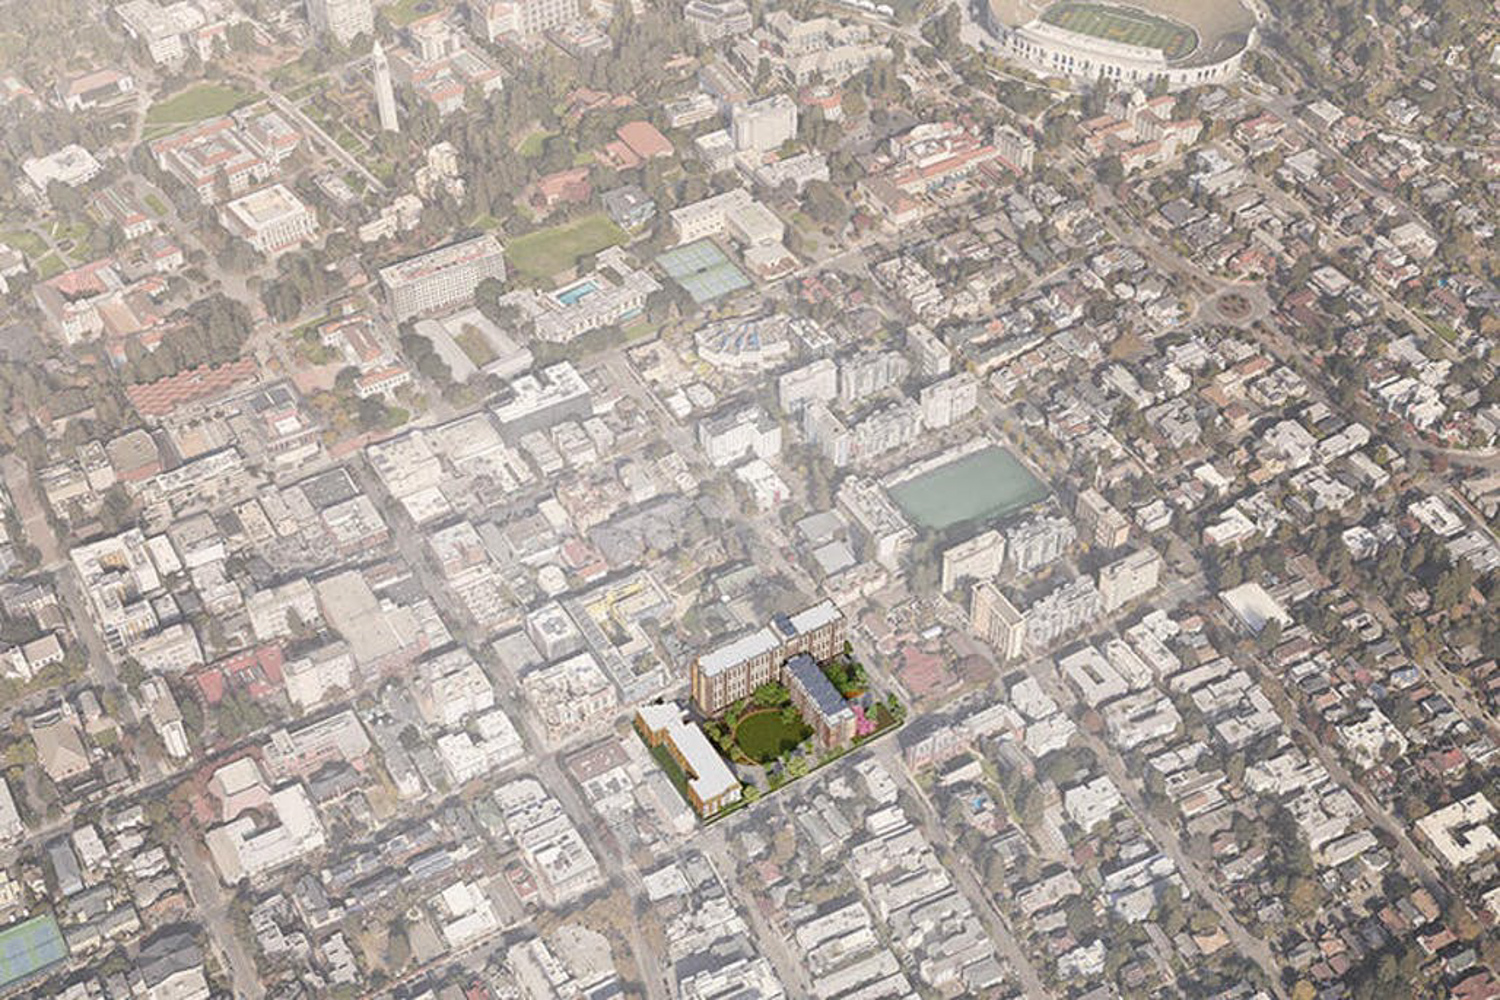 People's Park complex aerial view, image via UC Regent design by LMS Architects and Hood Design Studio